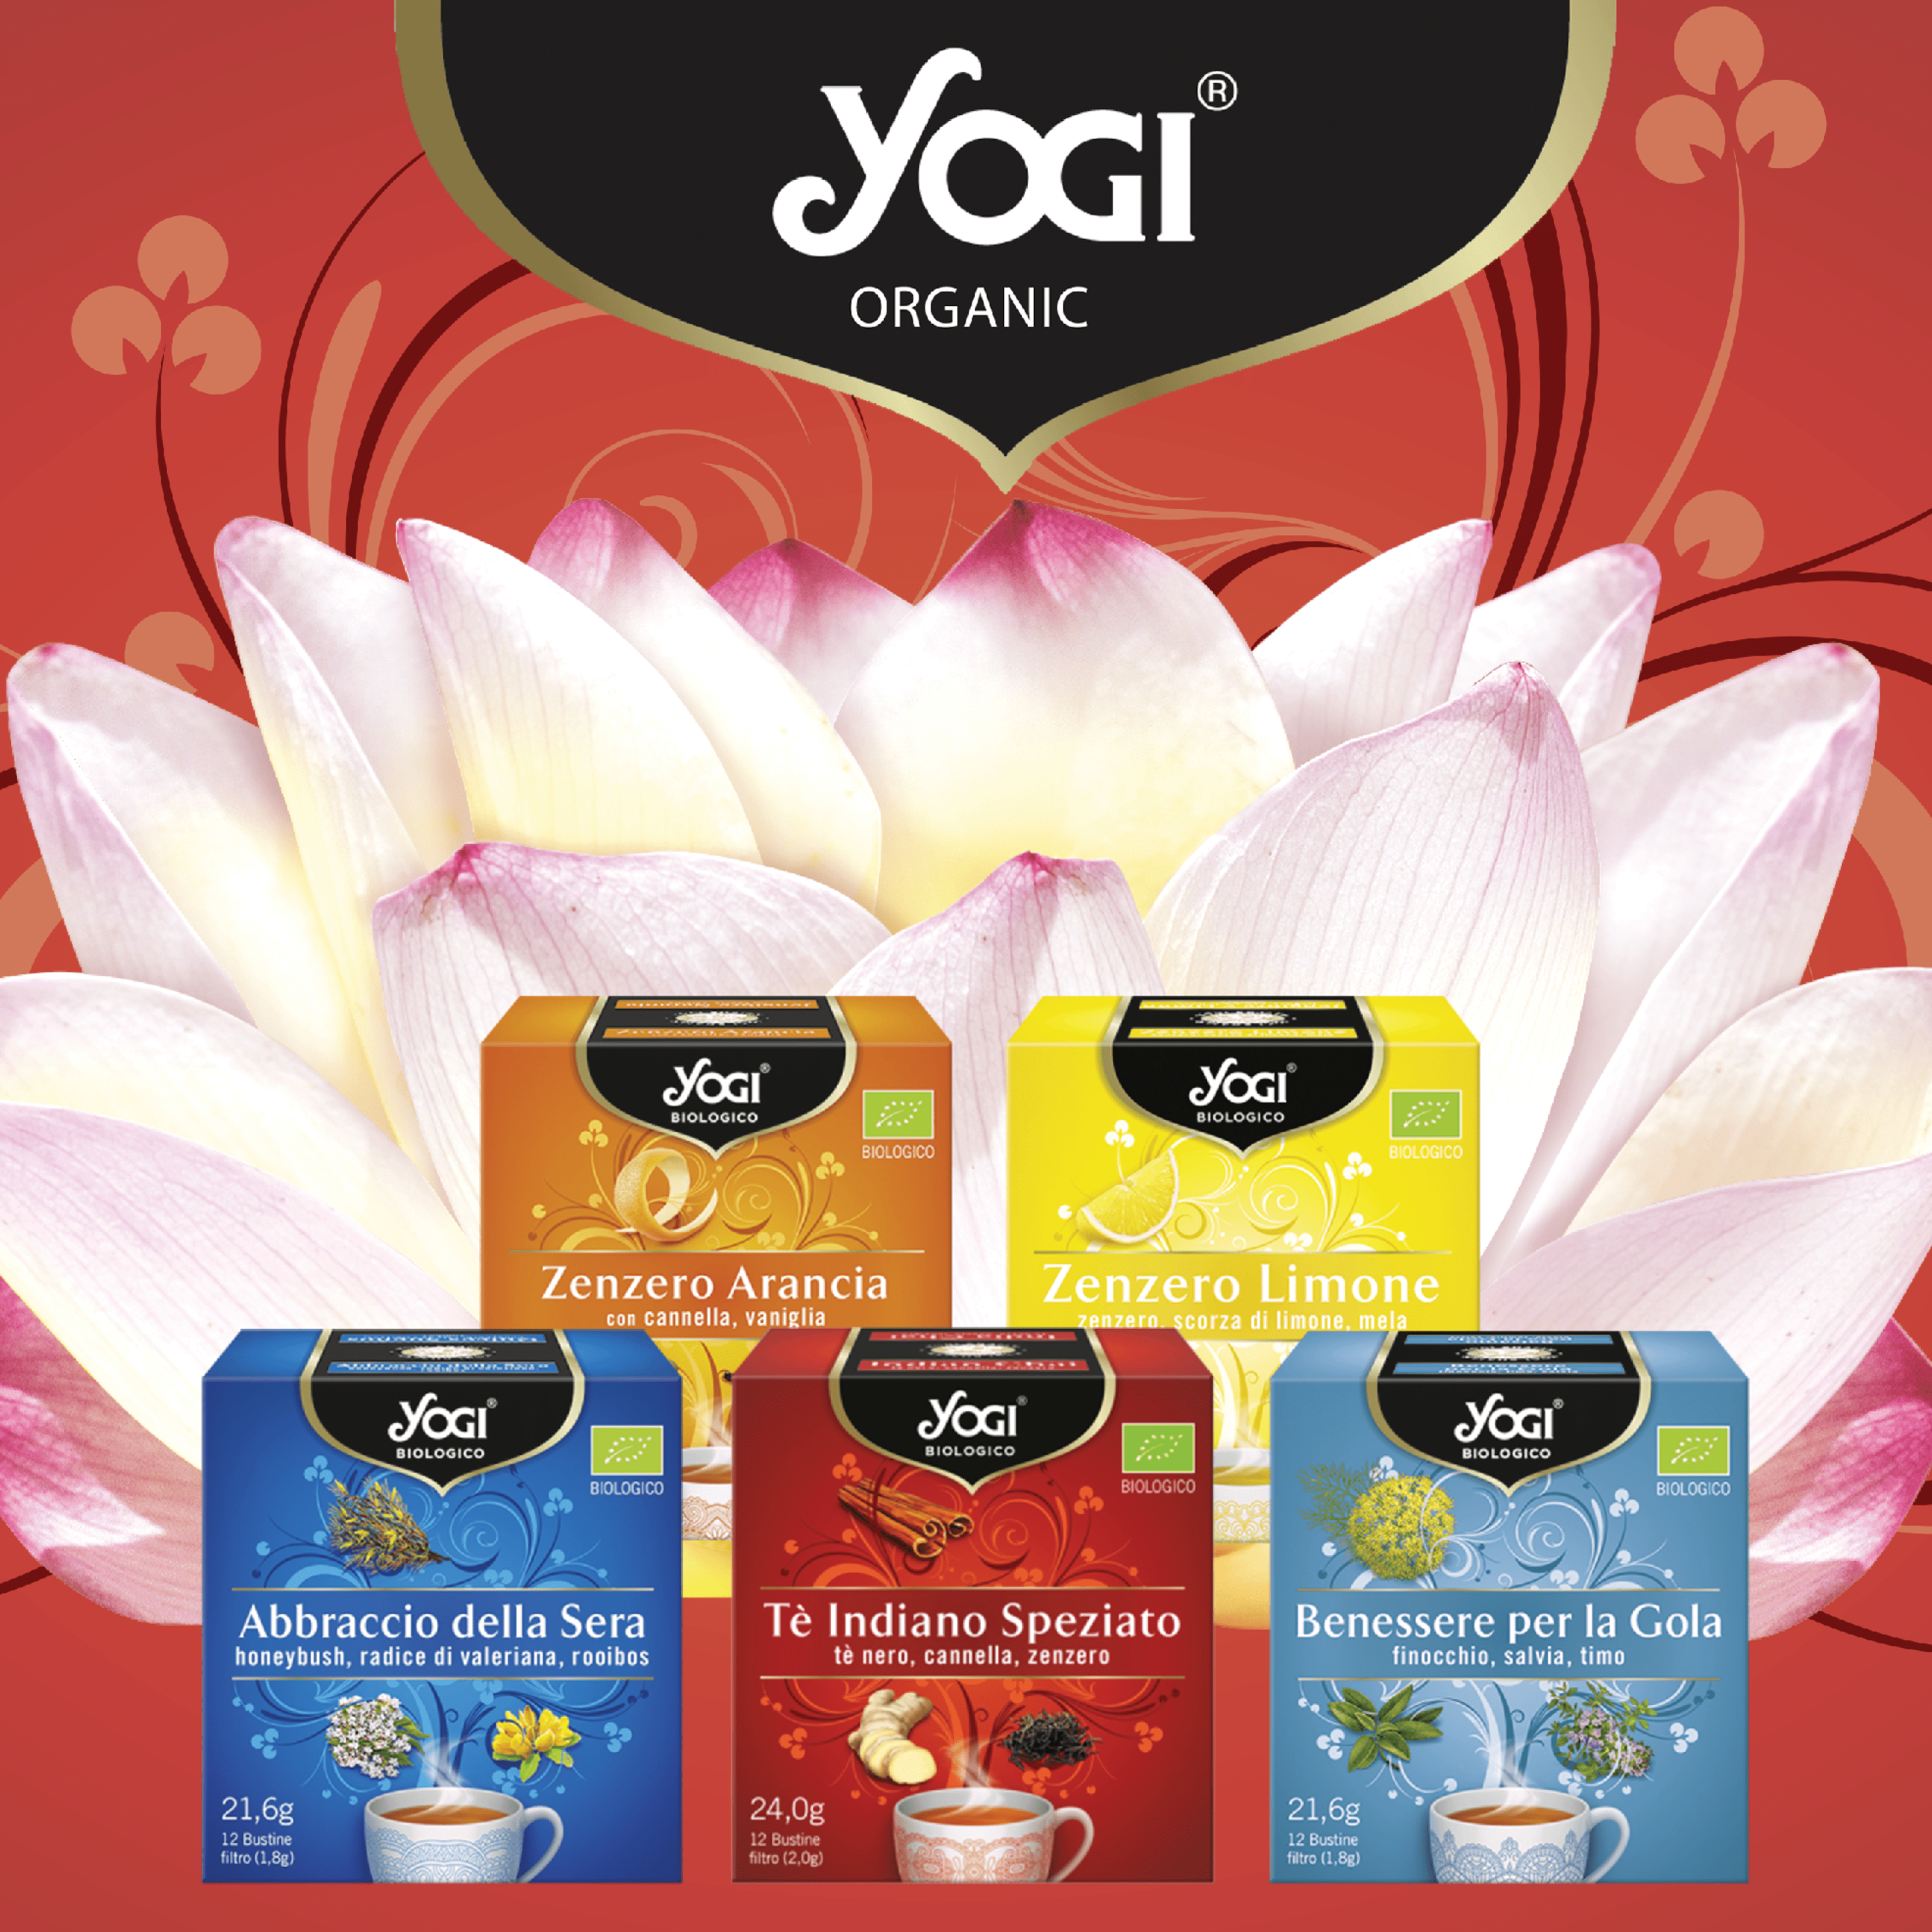 2015 – Launch of the new YOGI line, for the Mass Market